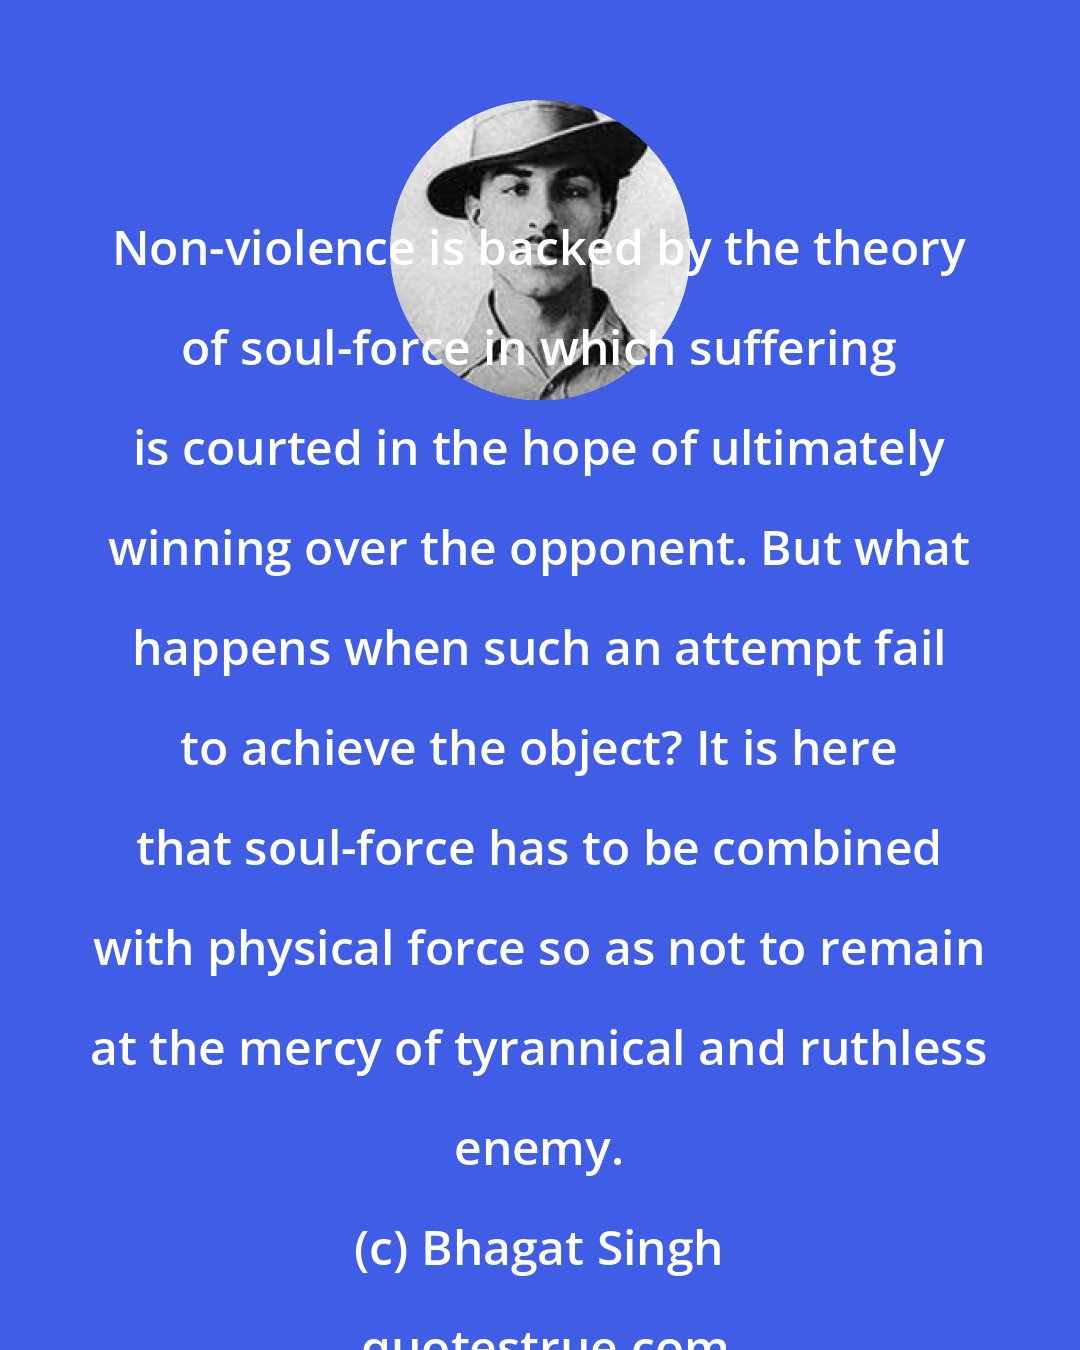 Bhagat Singh: Non-violence is backed by the theory of soul-force in which suffering is courted in the hope of ultimately winning over the opponent. But what happens when such an attempt fail to achieve the object? It is here that soul-force has to be combined with physical force so as not to remain at the mercy of tyrannical and ruthless enemy.